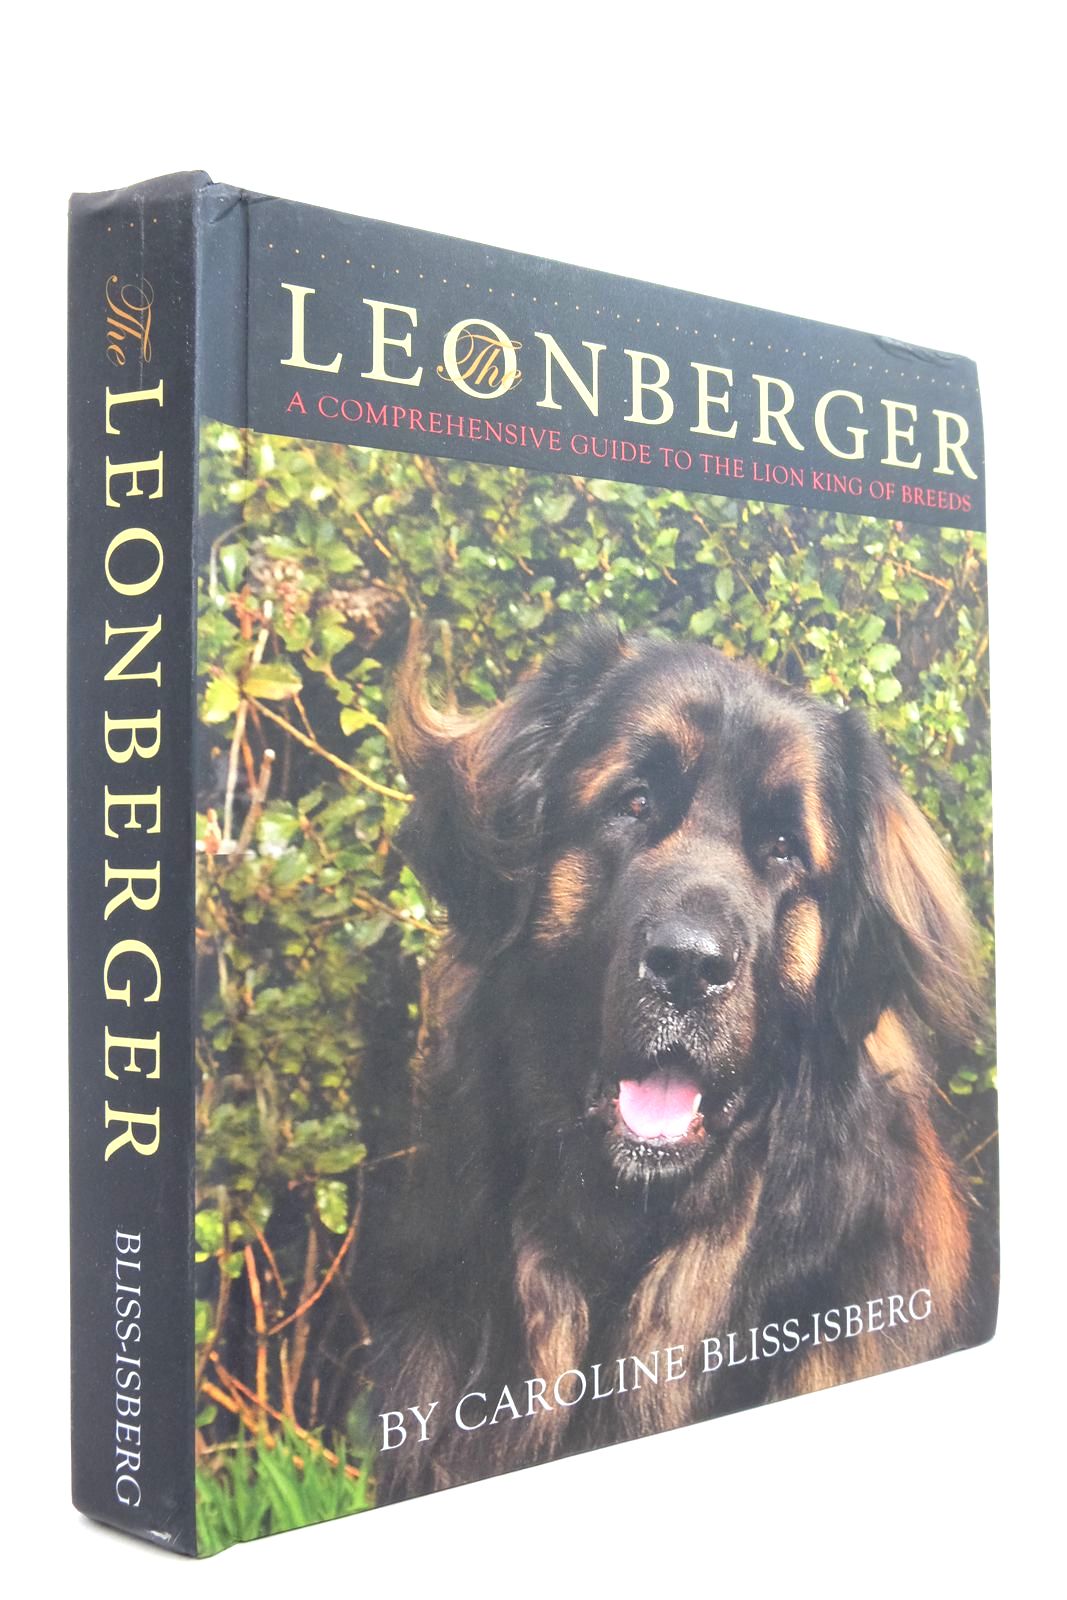 Photo of THE LEONBERGER: A COMPREHENSIVE GUIDE TO THE LION KING OF BREEDS written by Bliss-Isberg, Caroline published by Revodana Publishing (STOCK CODE: 2140076)  for sale by Stella & Rose's Books